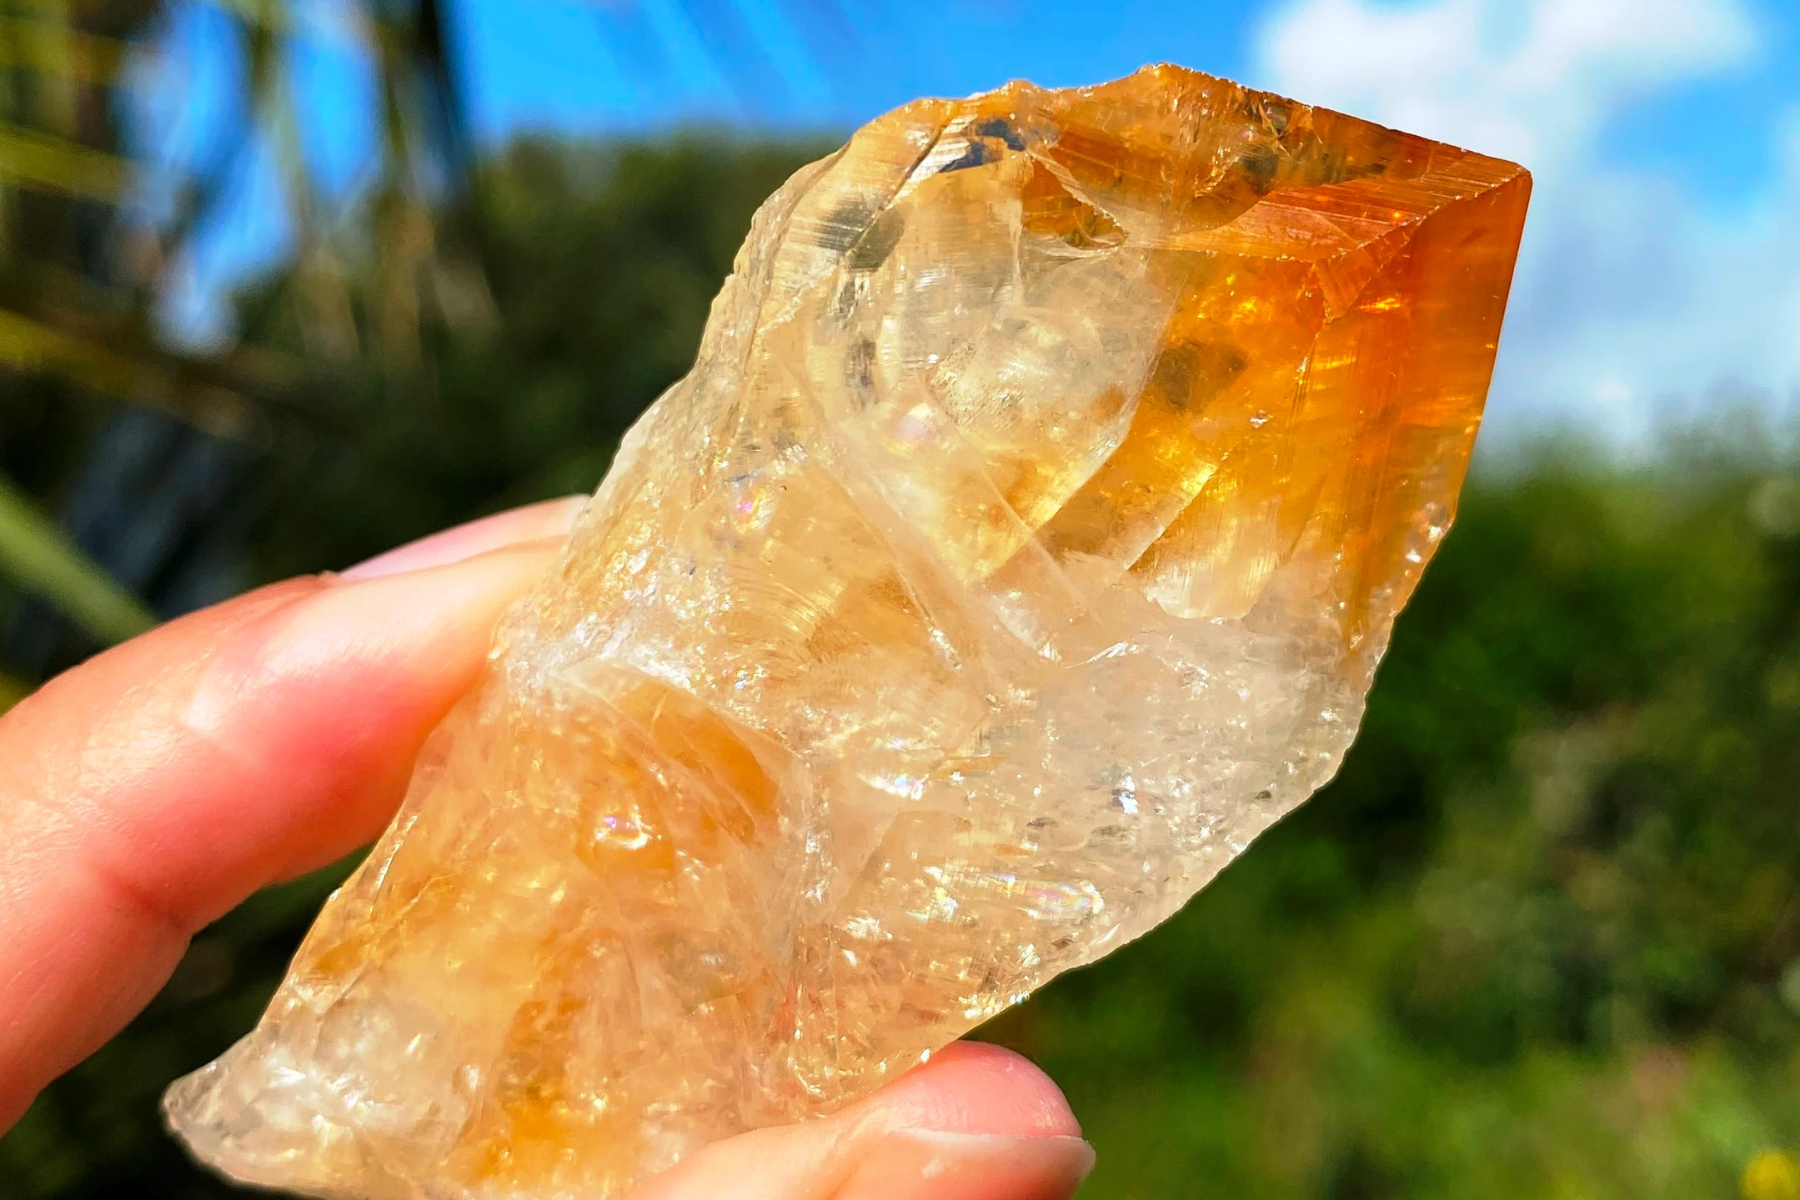 A raw citrine in the palm of a hand